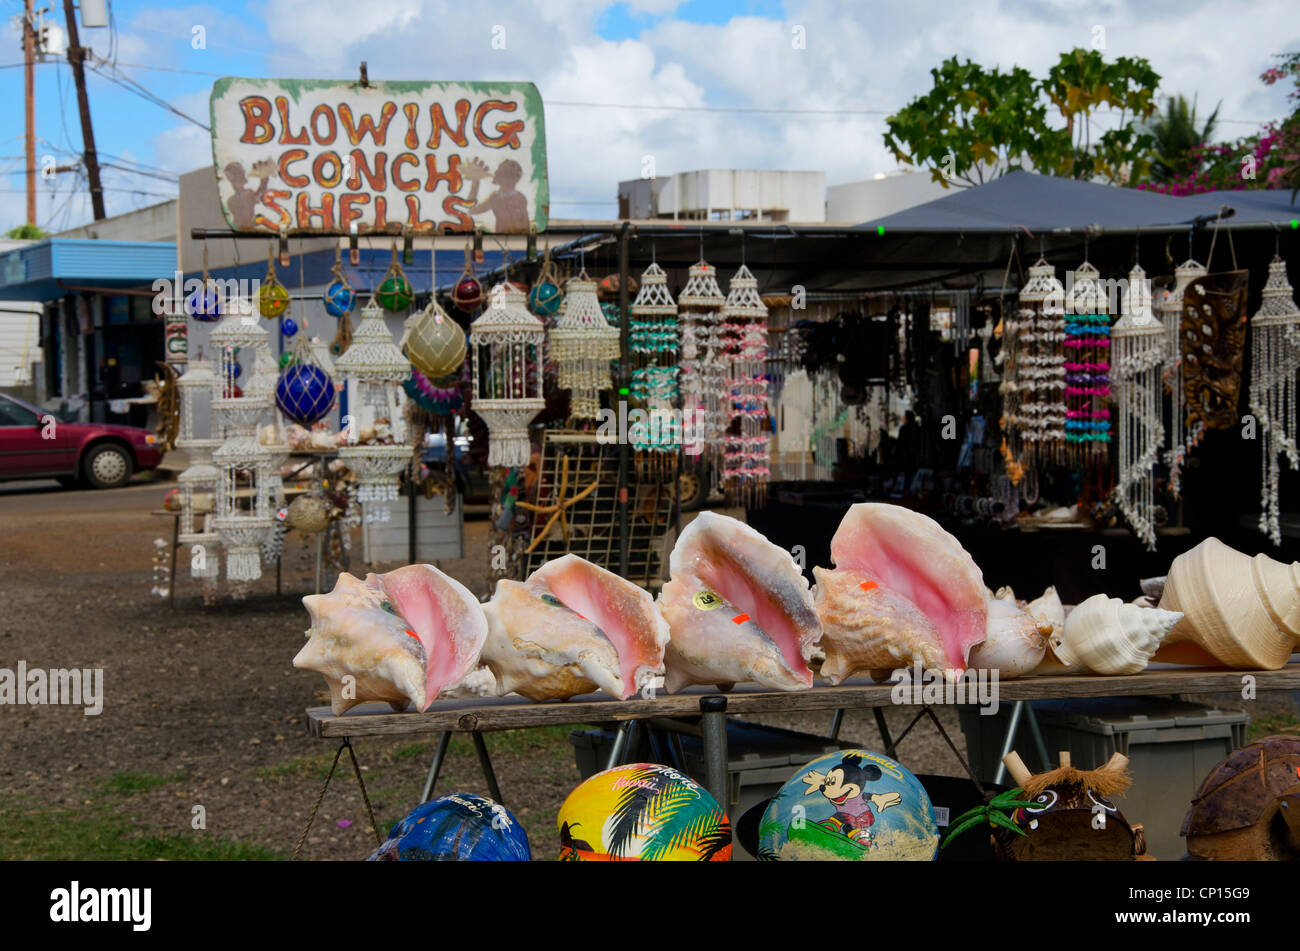 Blowing Conch Shells for sale at roadside stand at Haleiwa, Hawaii on Oahu Island Stock Photo